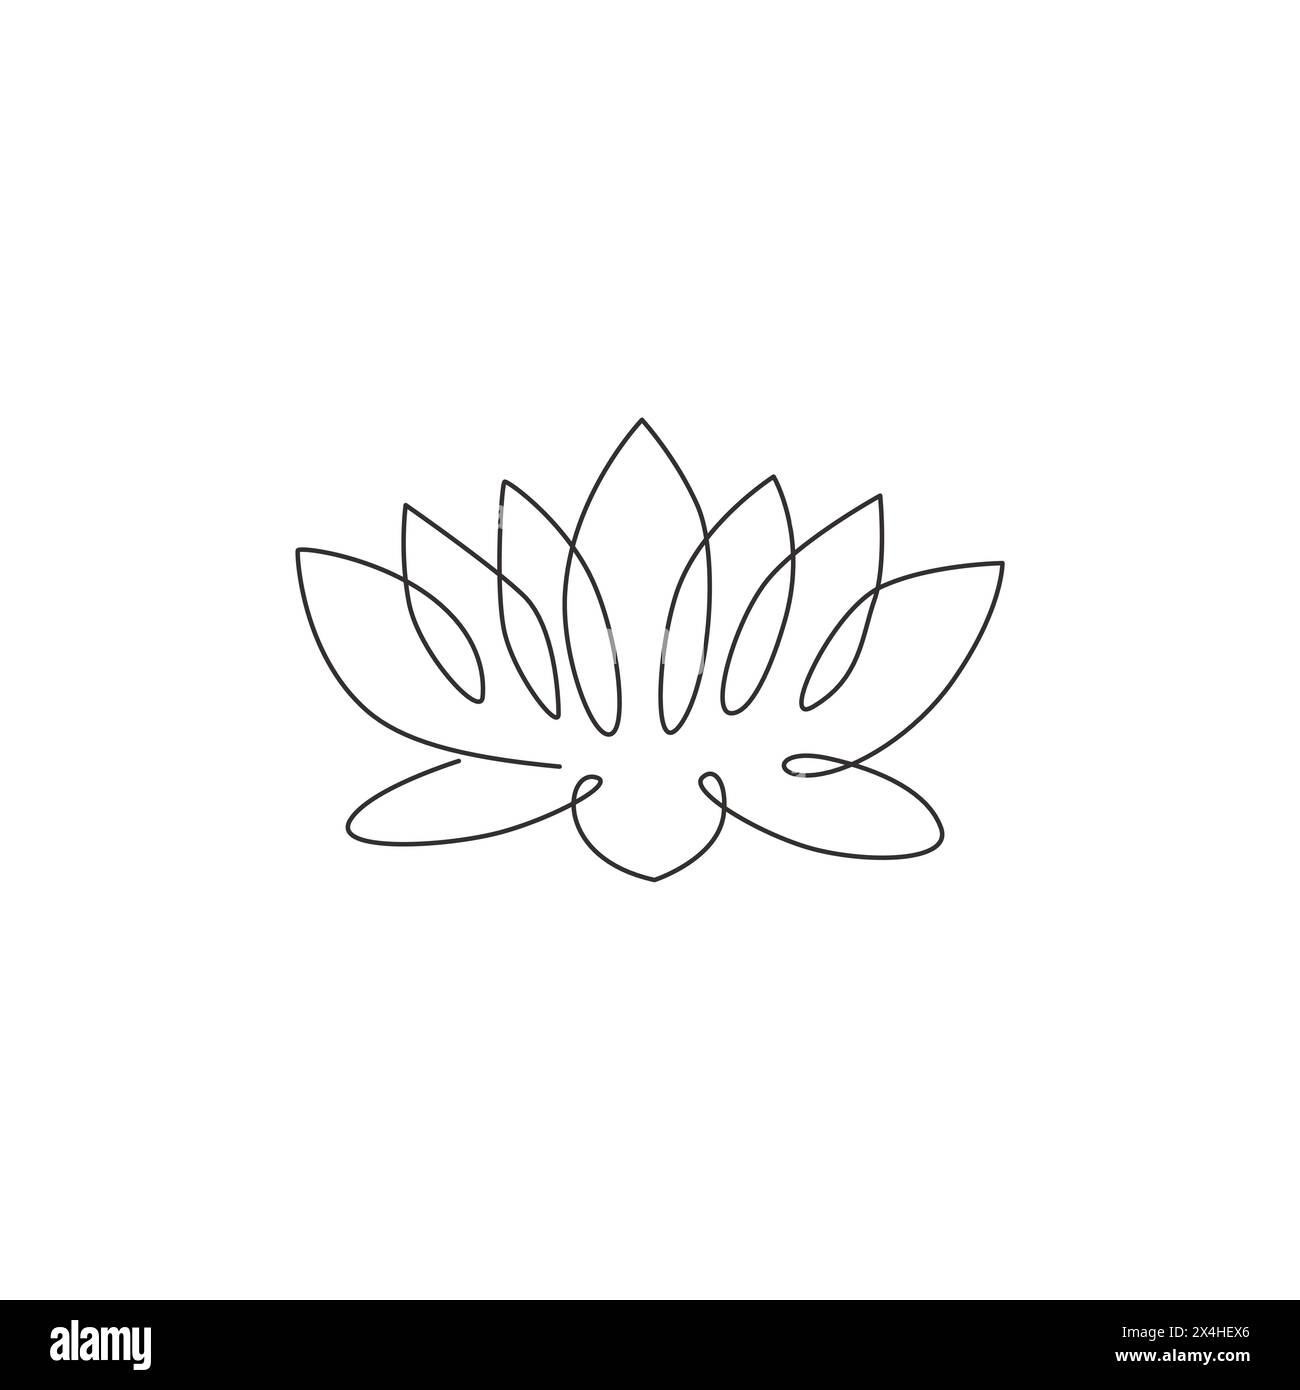 Single continuous line drawing of beauty fresh lotus for salon relaxation therapy business logo. Decorative water lily flower concept for home wall de Stock Vector